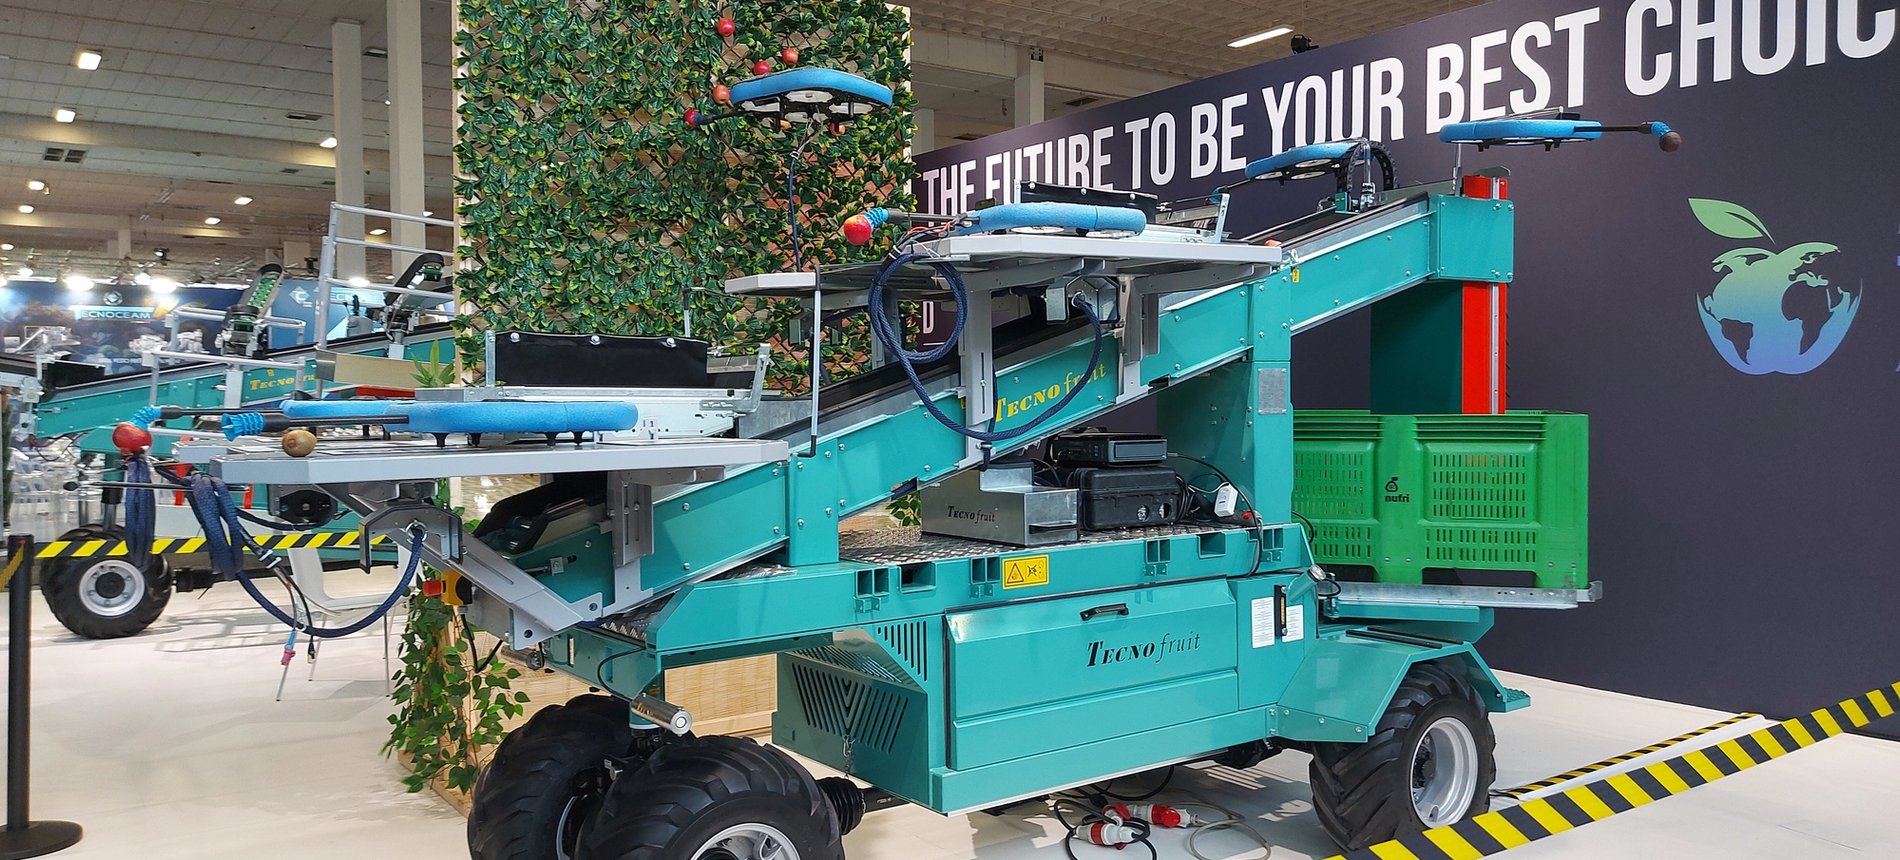 Tecnofruit Harvesters are taking over the UK!